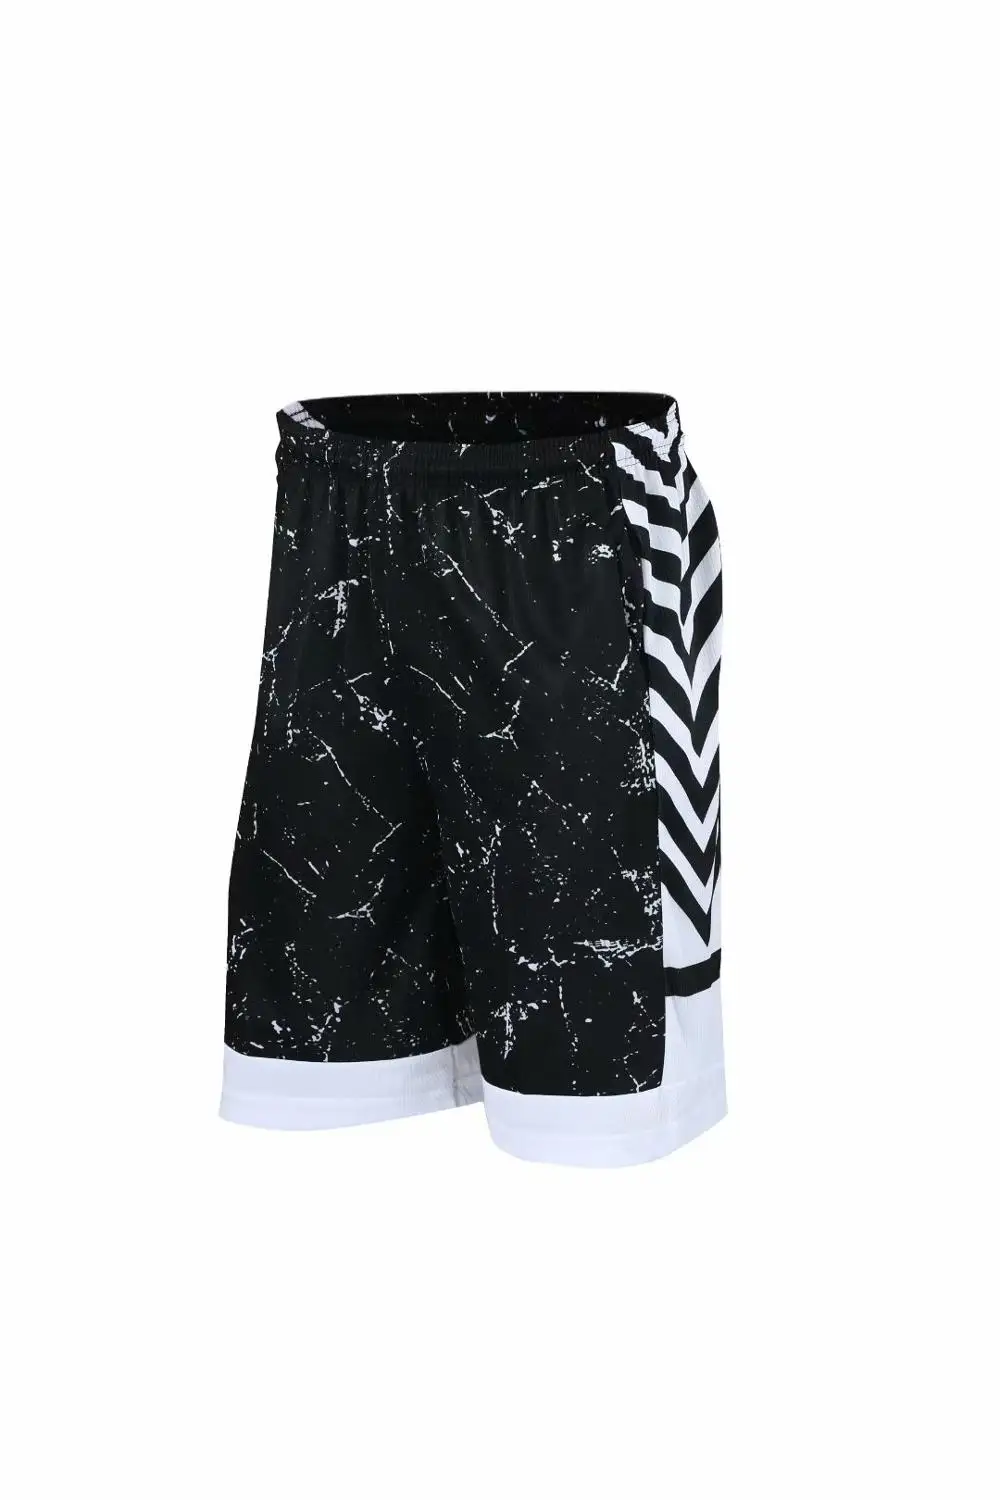 Basketball Shorts for Men Breathable Camouflage Running Shorts Loose Training Gym Fitness Sports Short Trousers Men with Pocket - Цвет: 9910 black